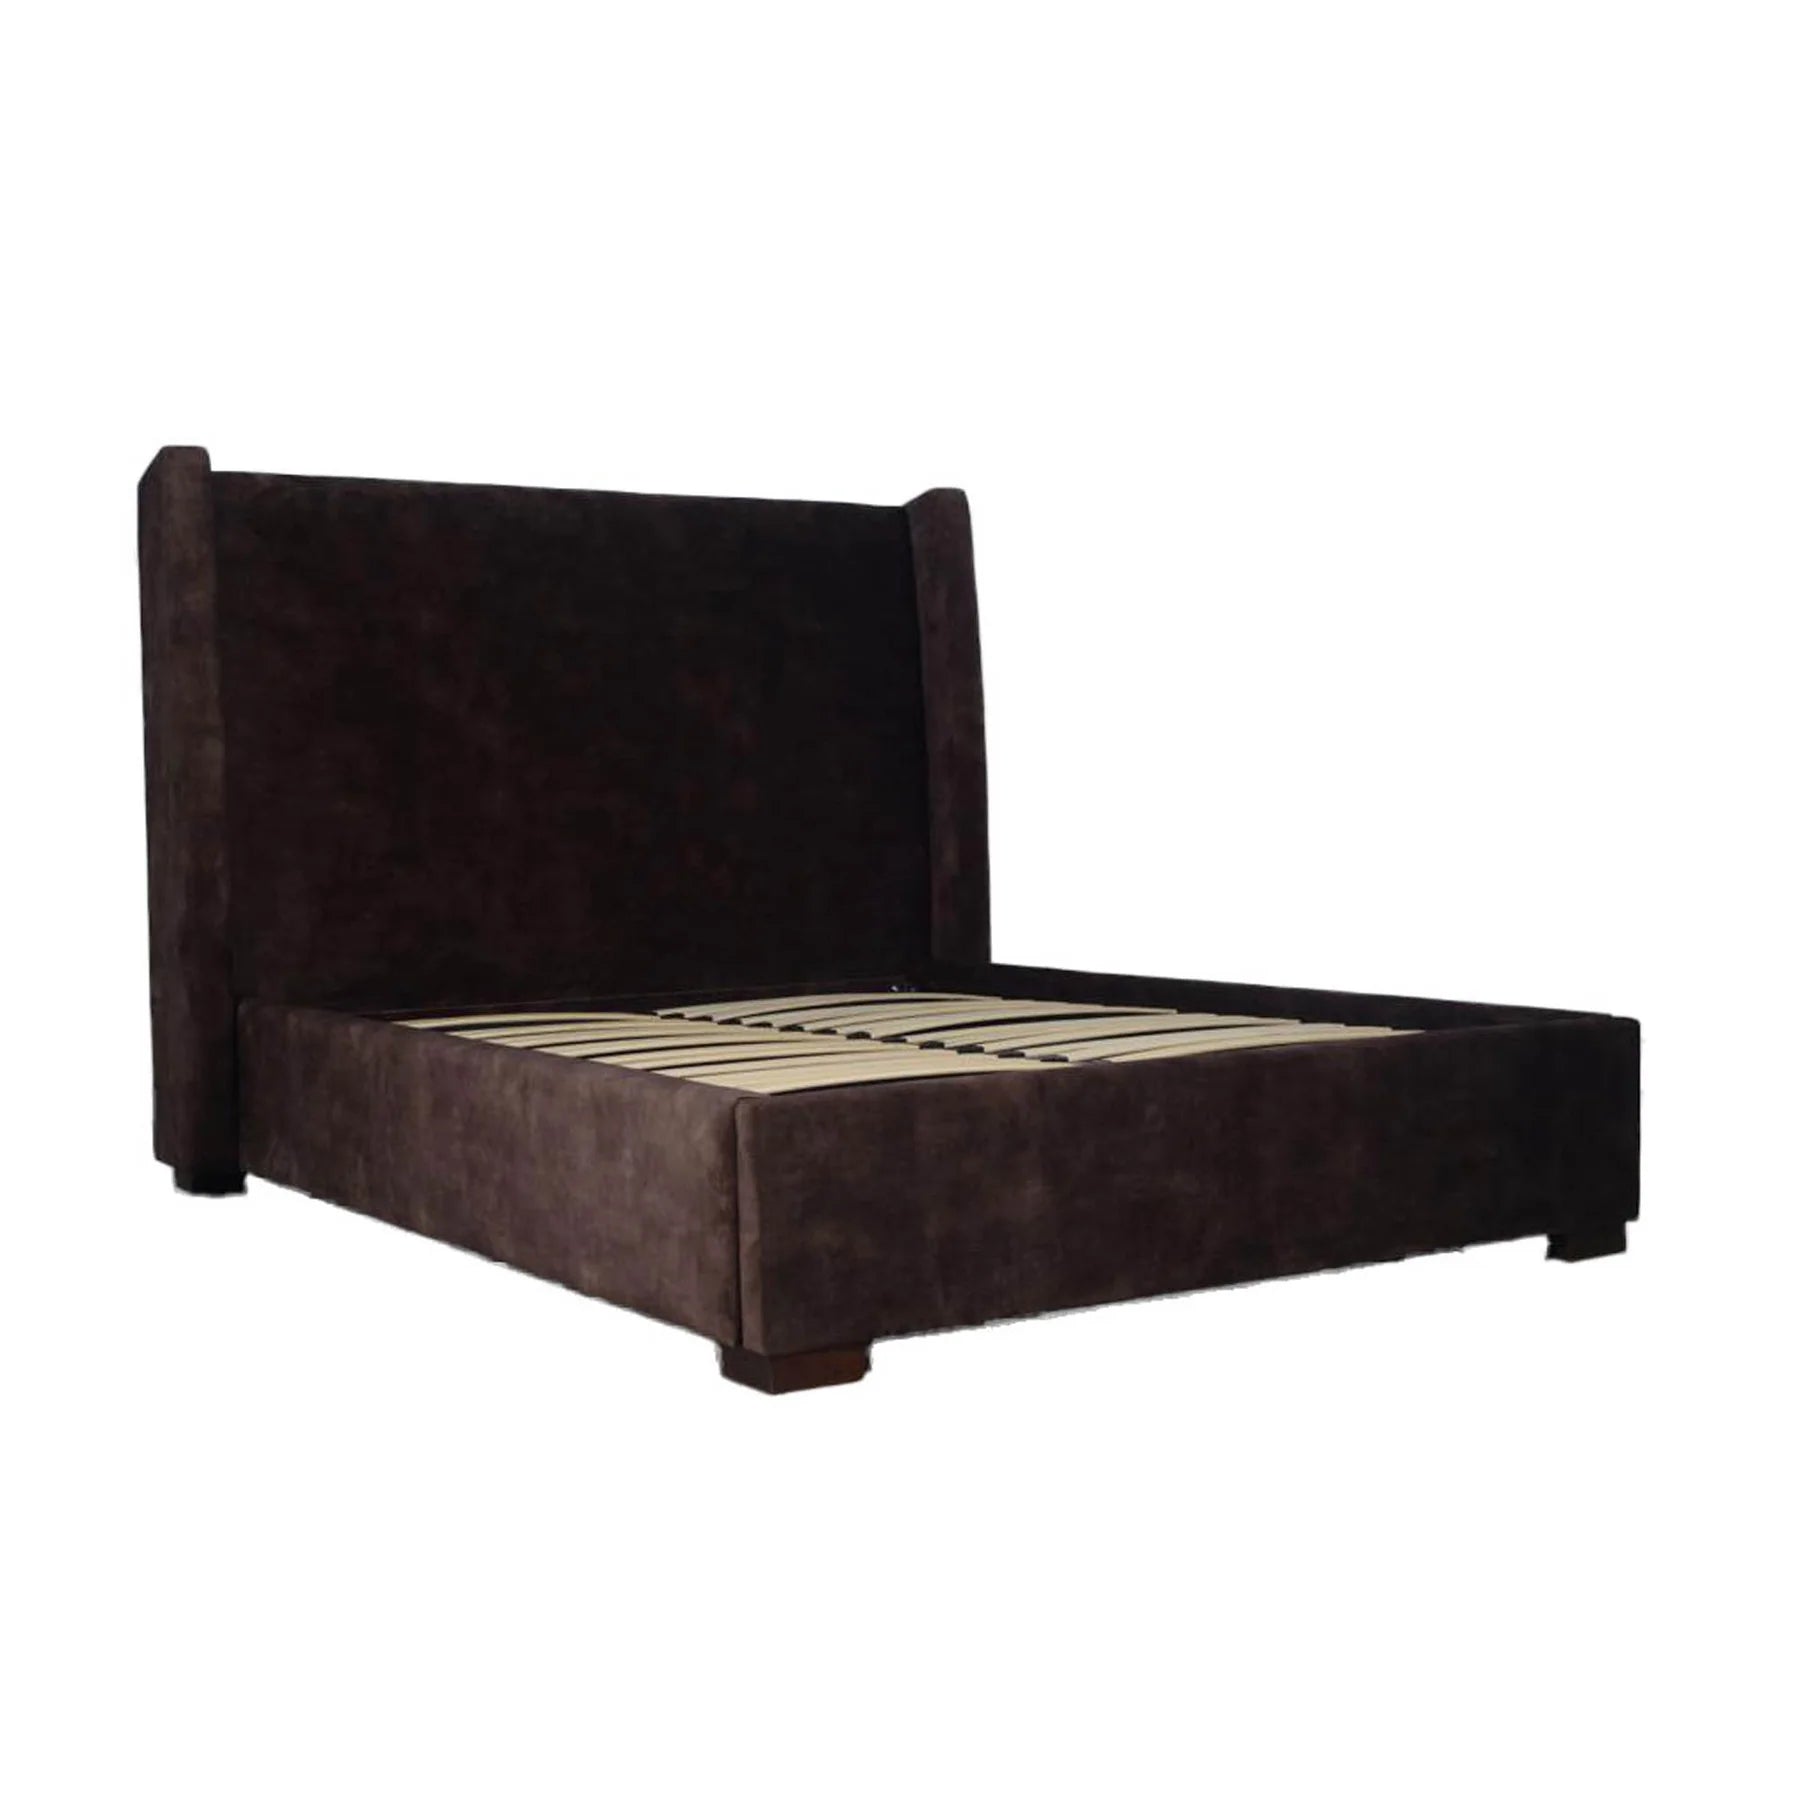 Picture of Cora Storage King Bed